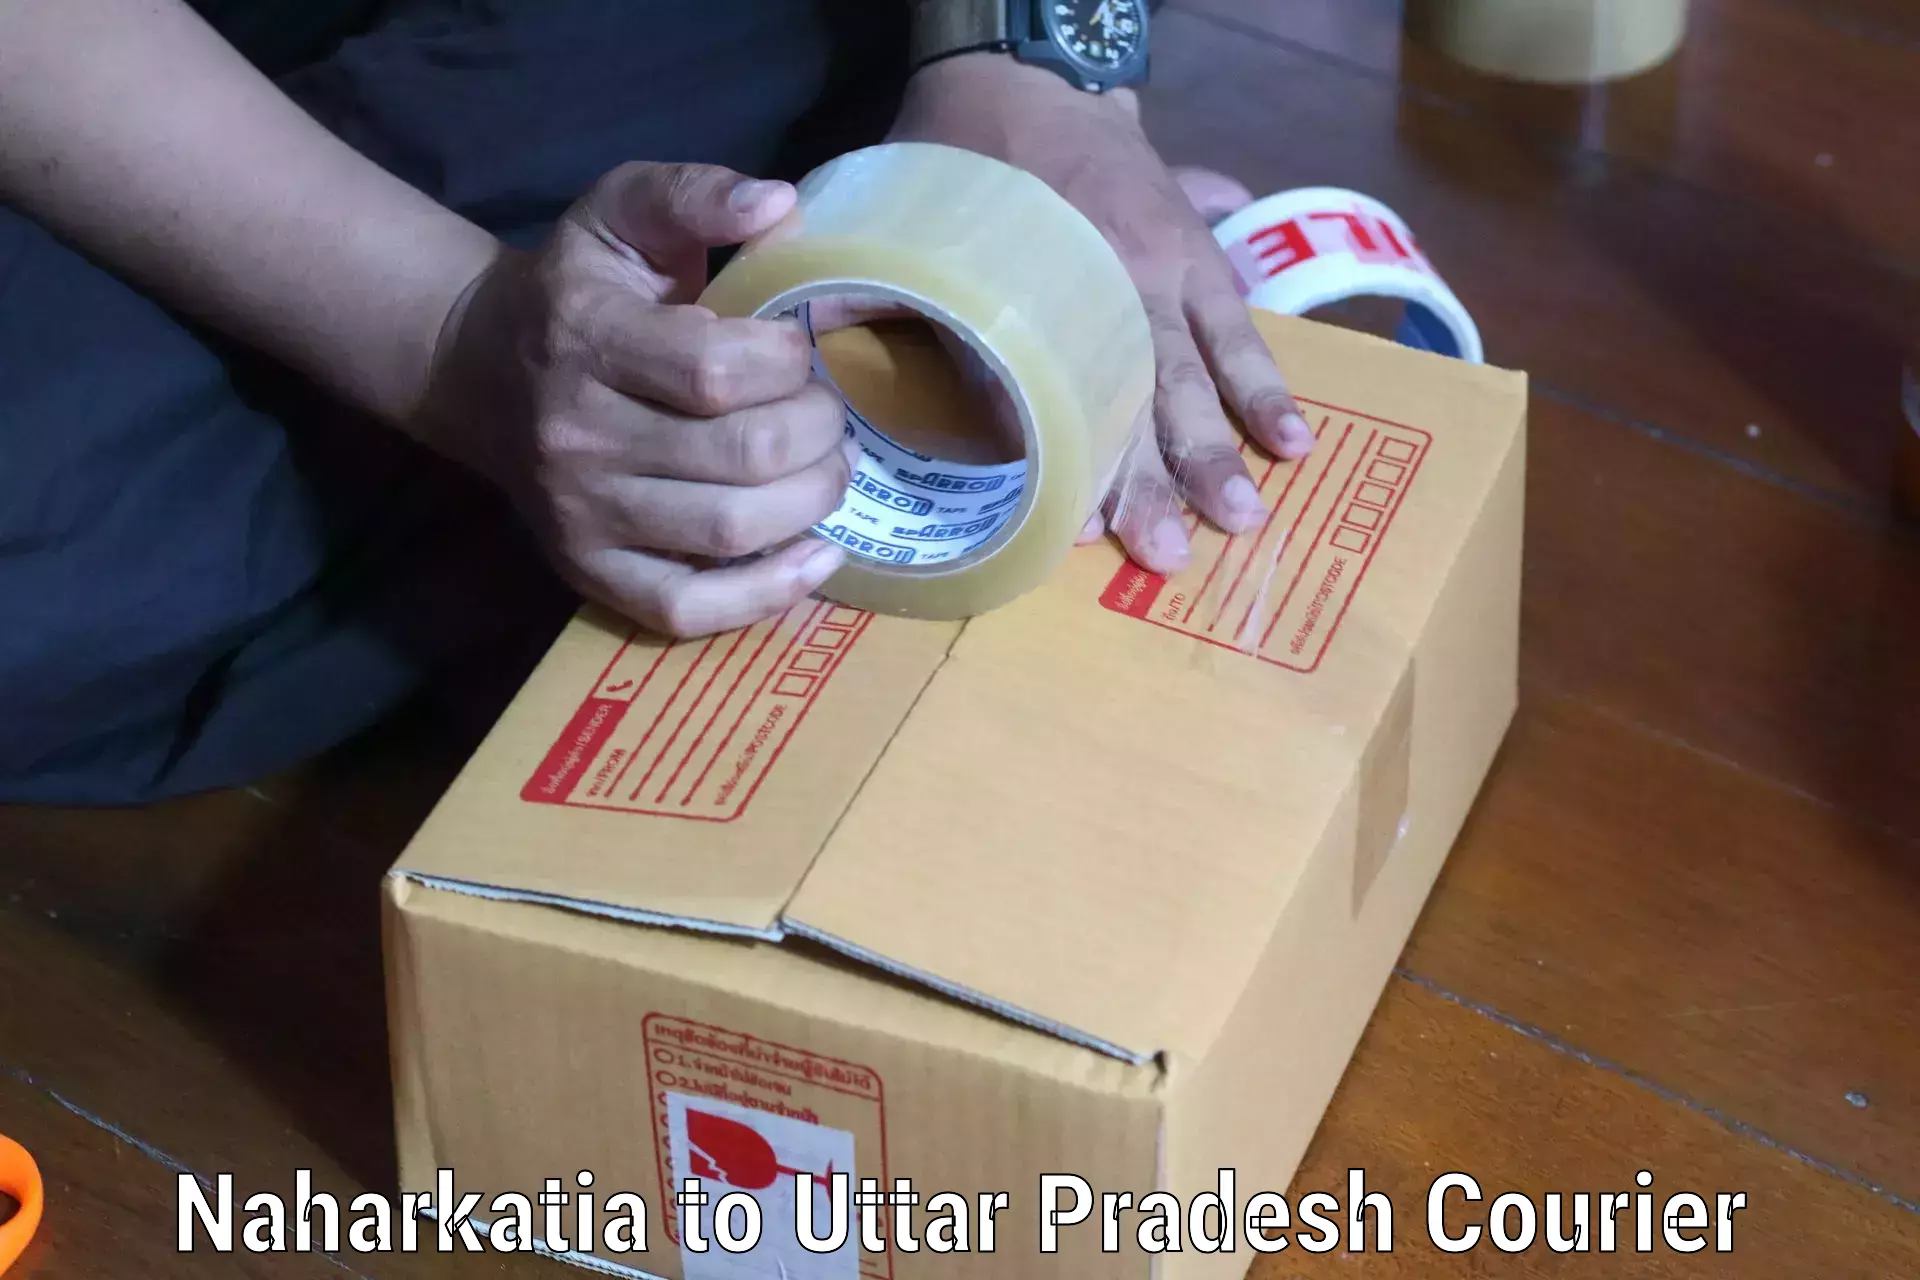 Courier service booking Naharkatia to Ayodhya